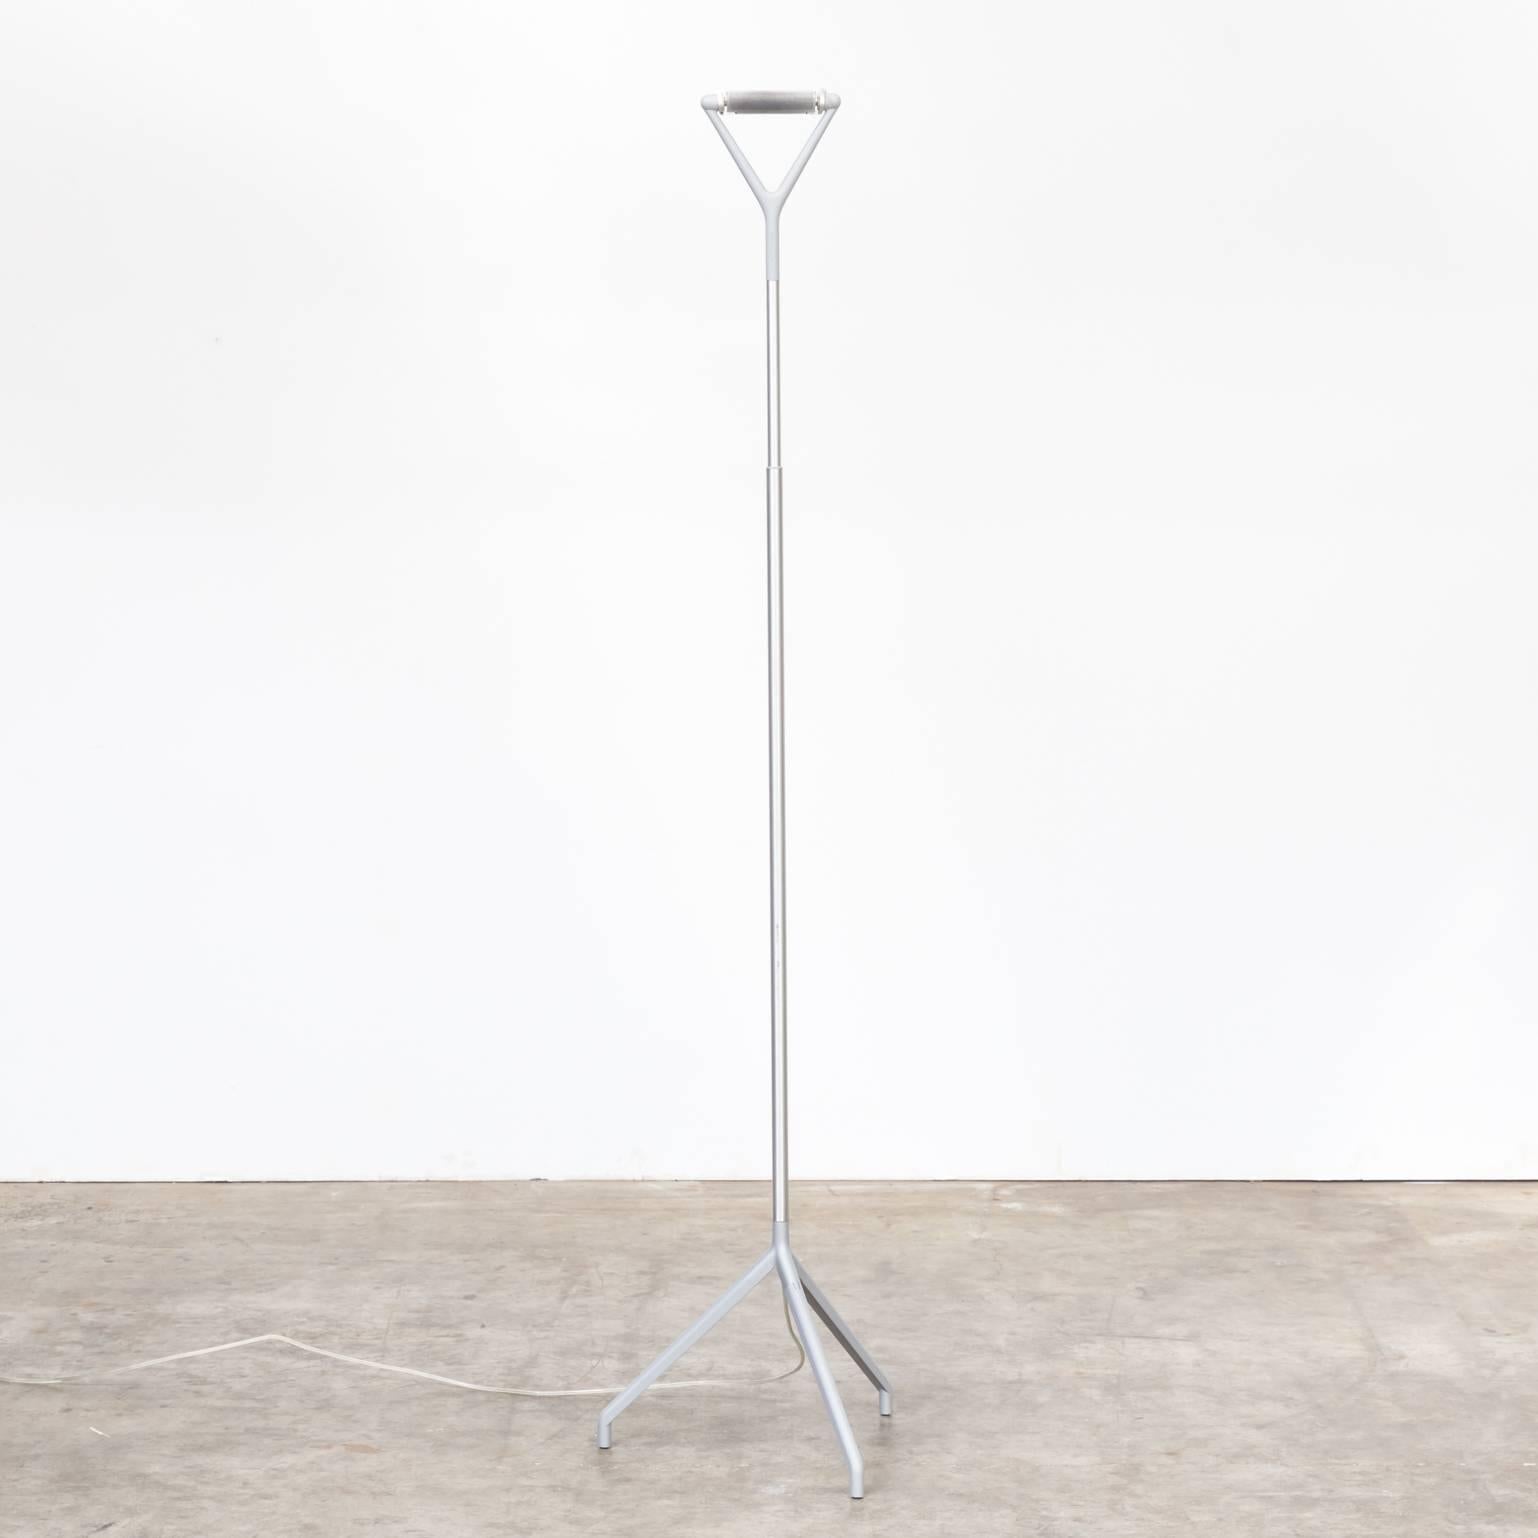 1980s Meda & Rizzatto ‘lola’ floor lamp adjustable height for Luceplan. Good condition, consistent with age and use.